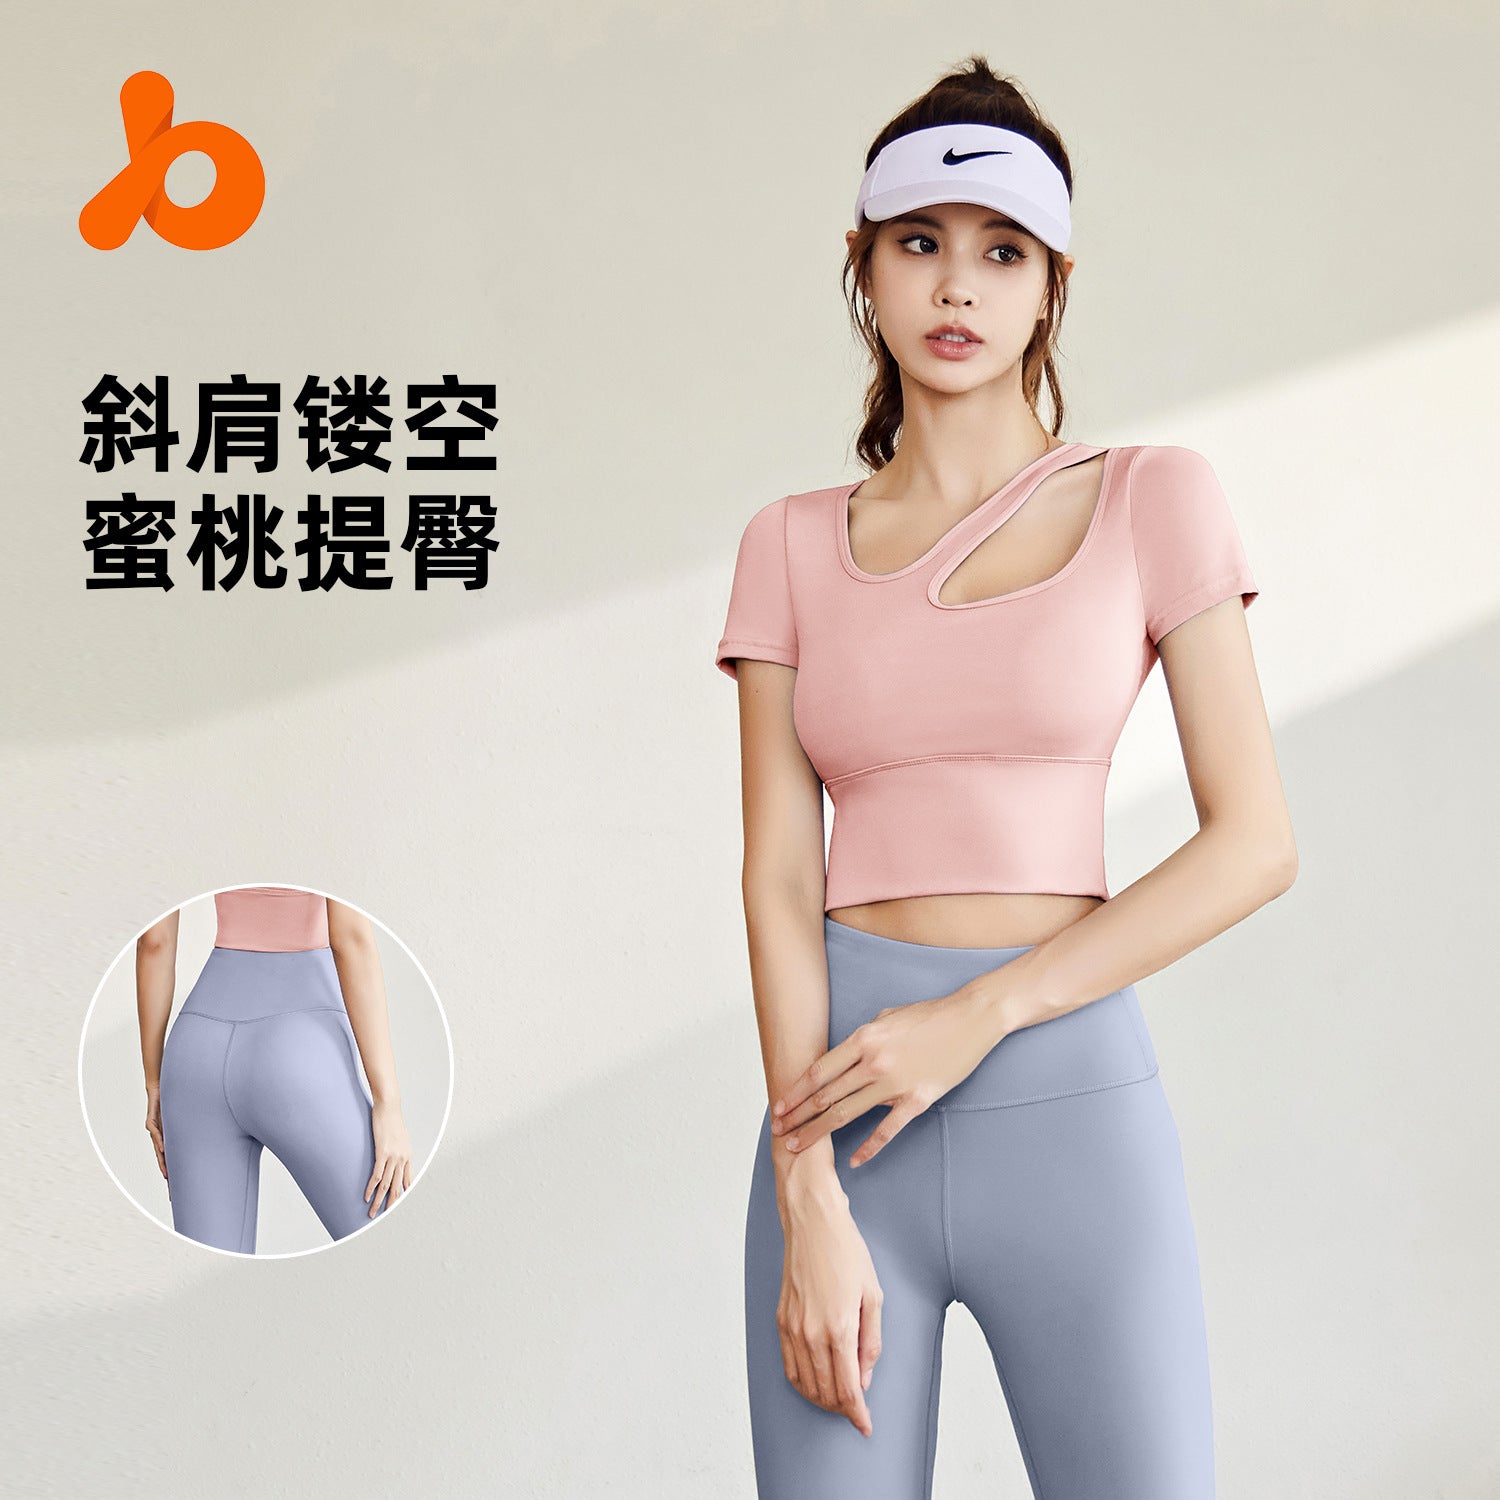 Juyitang quick-drying yoga suit set for women breathable and thin running sports all-in-one fitness suit